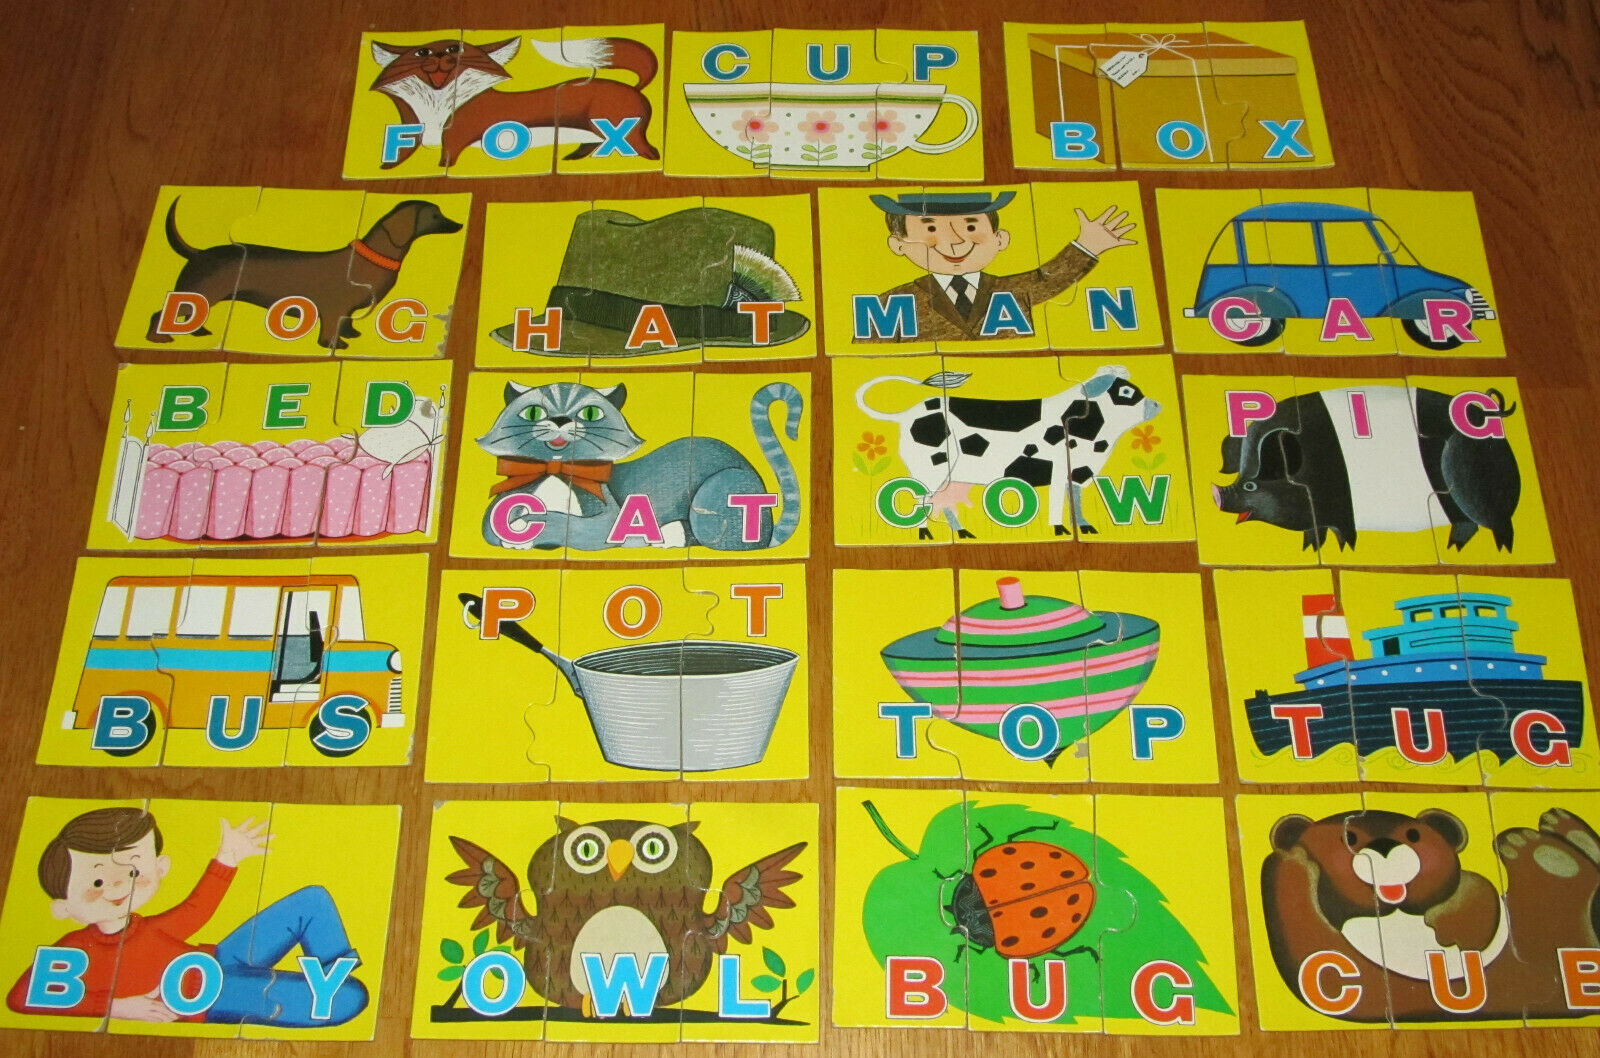 Playskool Jigsaw Puzzles - Words to Spell Match-Ups - 19 Puzzles - 1978 - $8.99